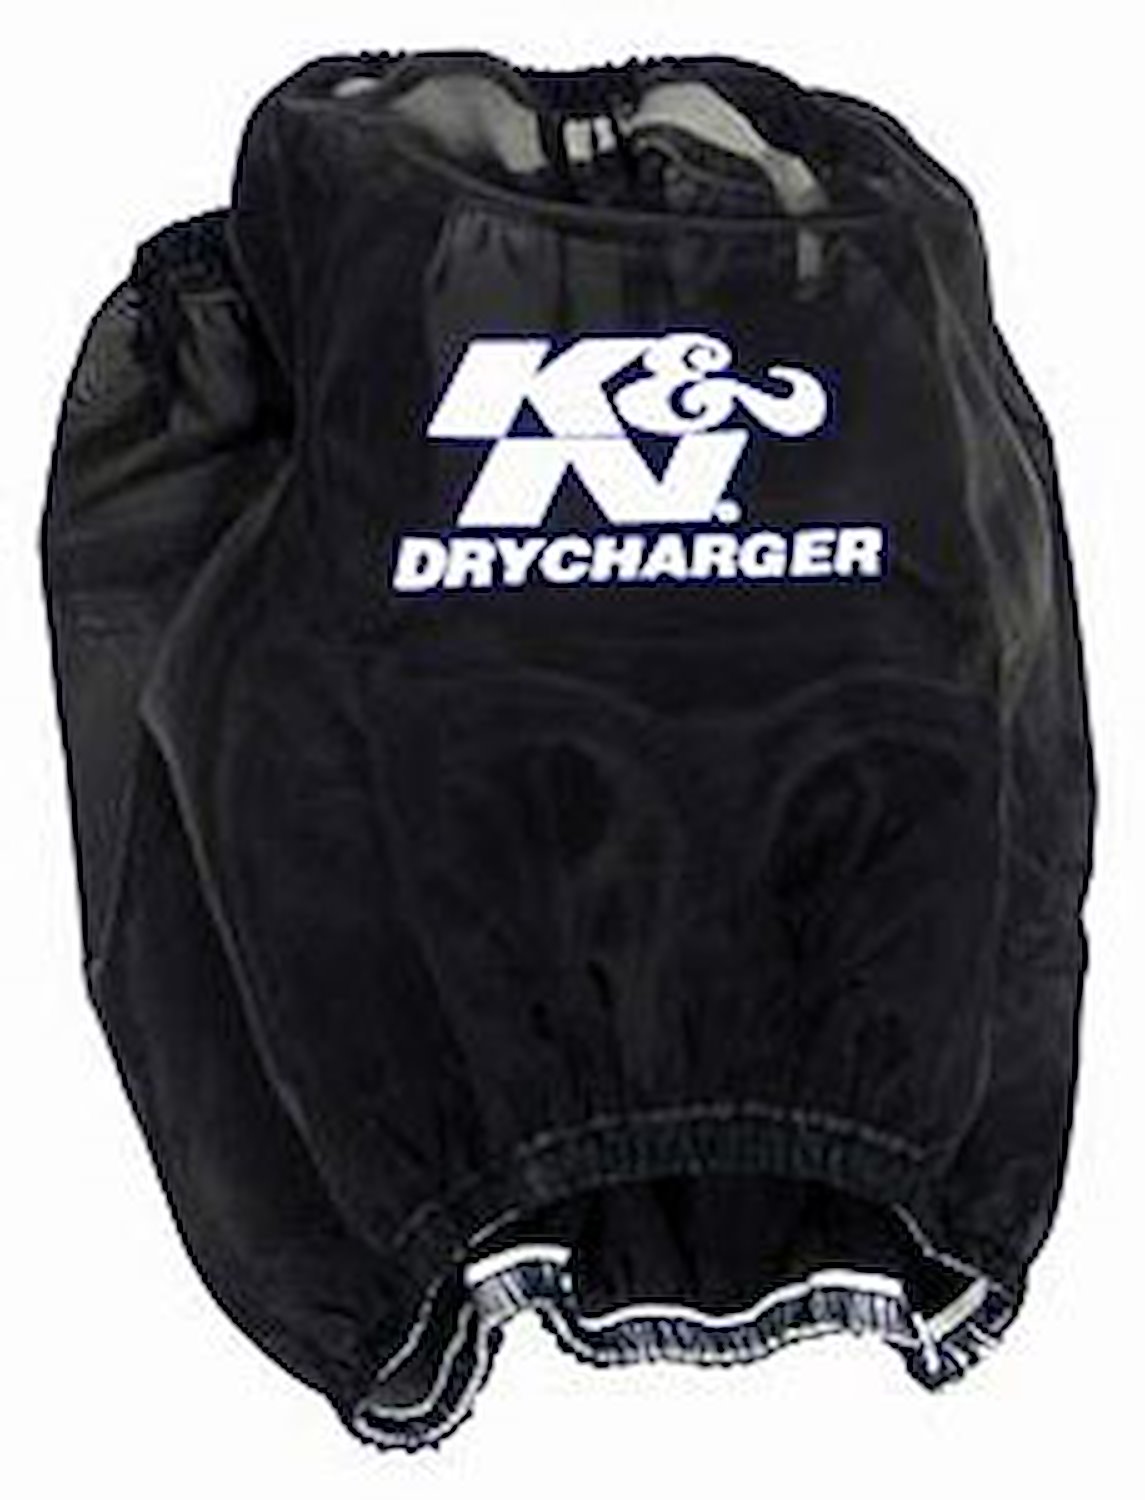 DRYCHARGER WRAP RP-5103 BLACK